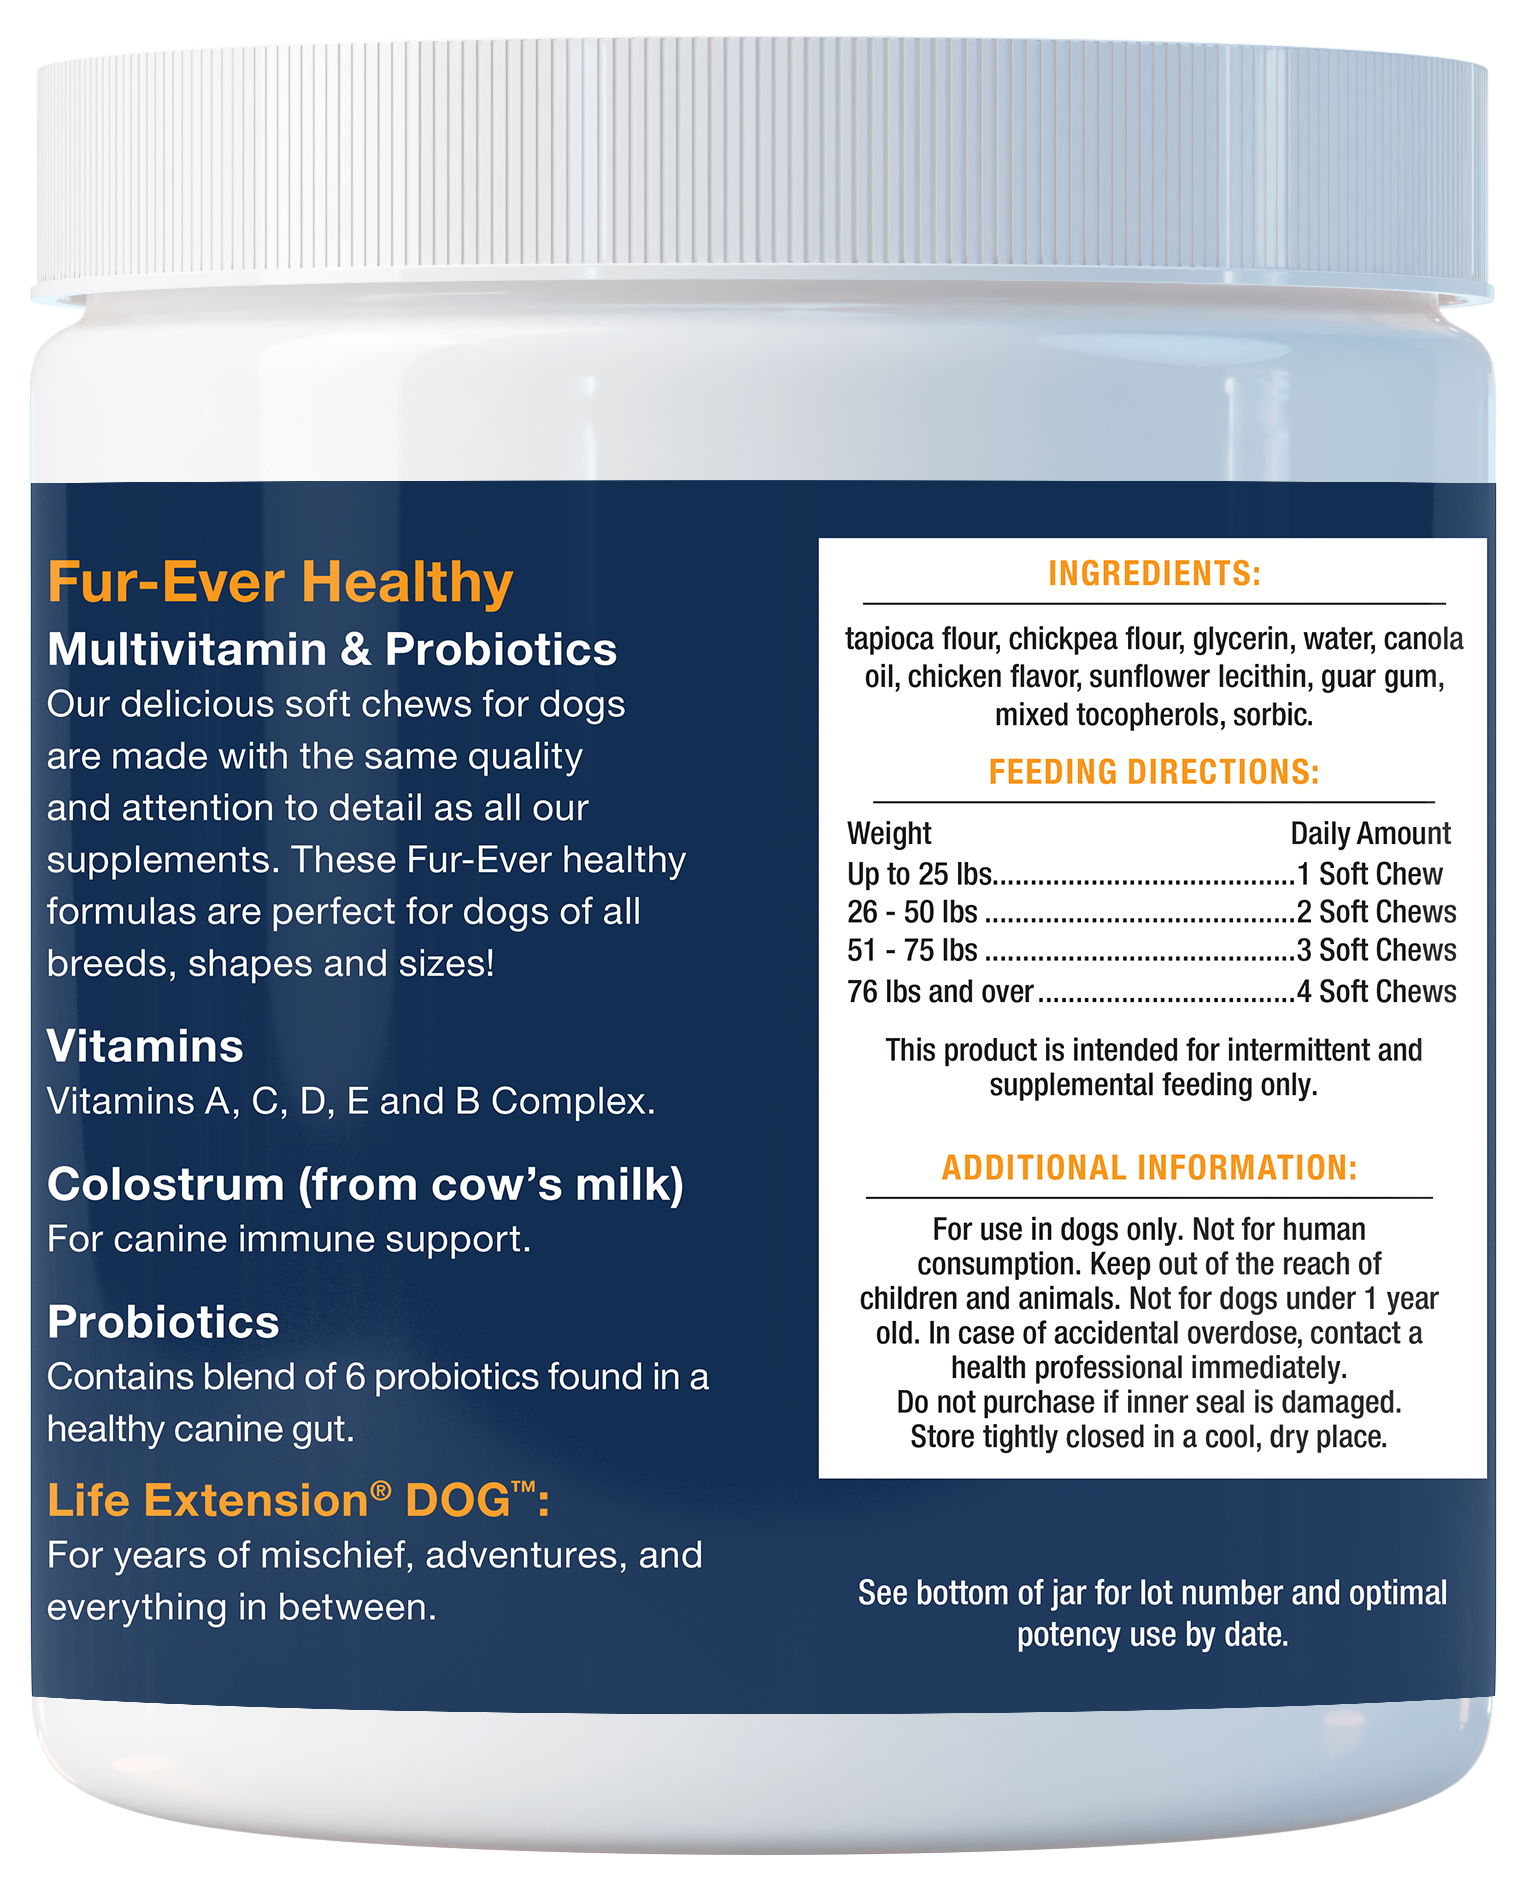 DOG Multivitamin & Probiotics is 90 soft chews for the dogs' overall, immune, and digestive health, supplement facts.